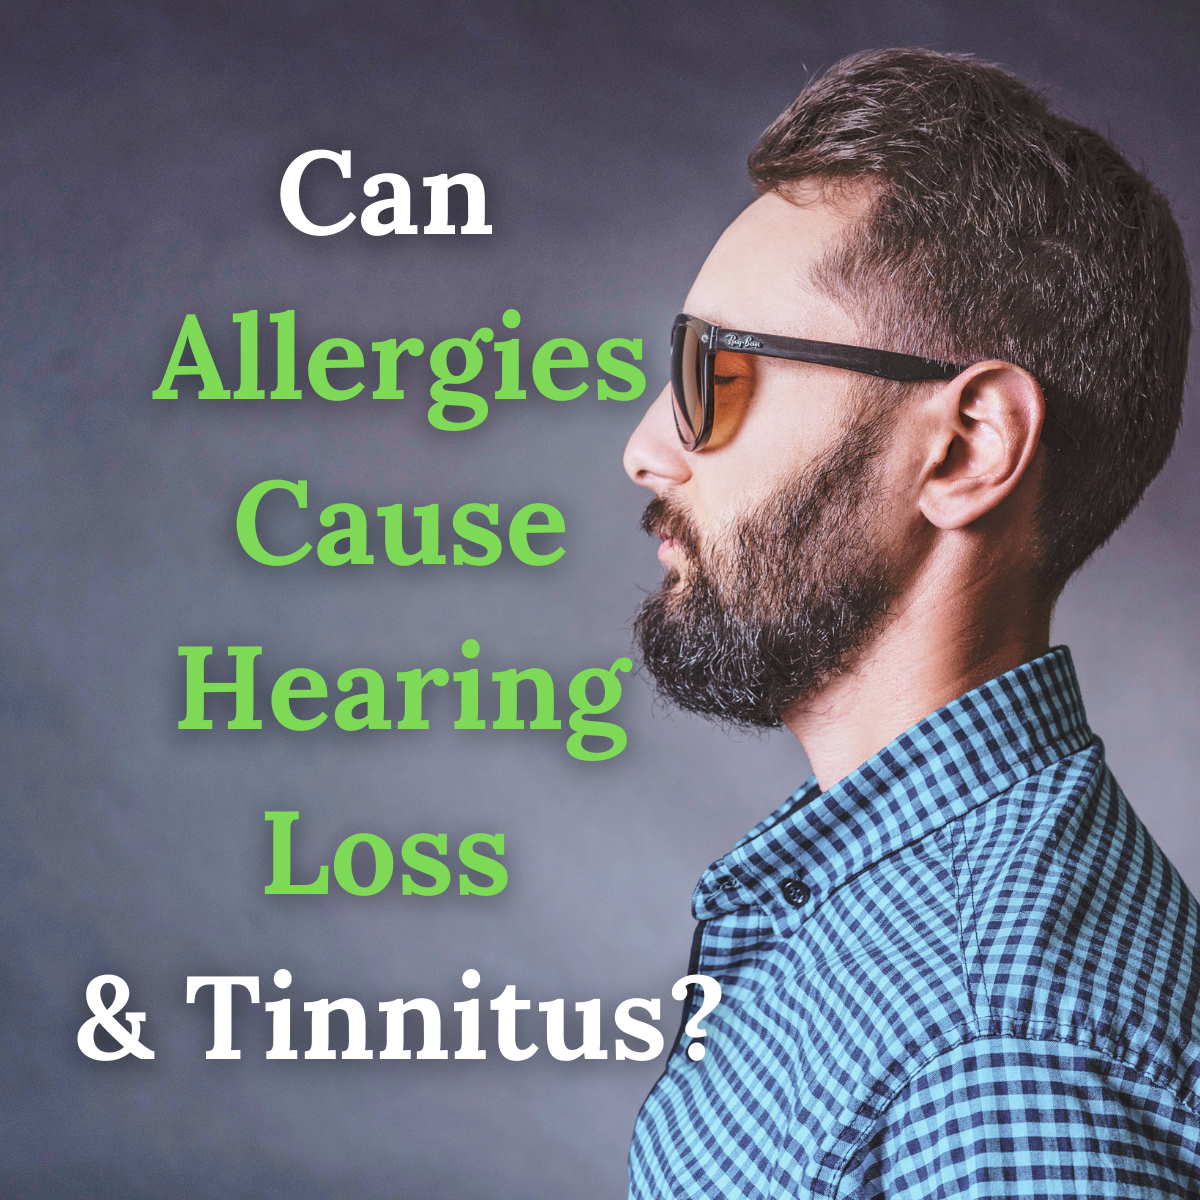 Can Allergies Cause Hearing Loss and Tinnitus?